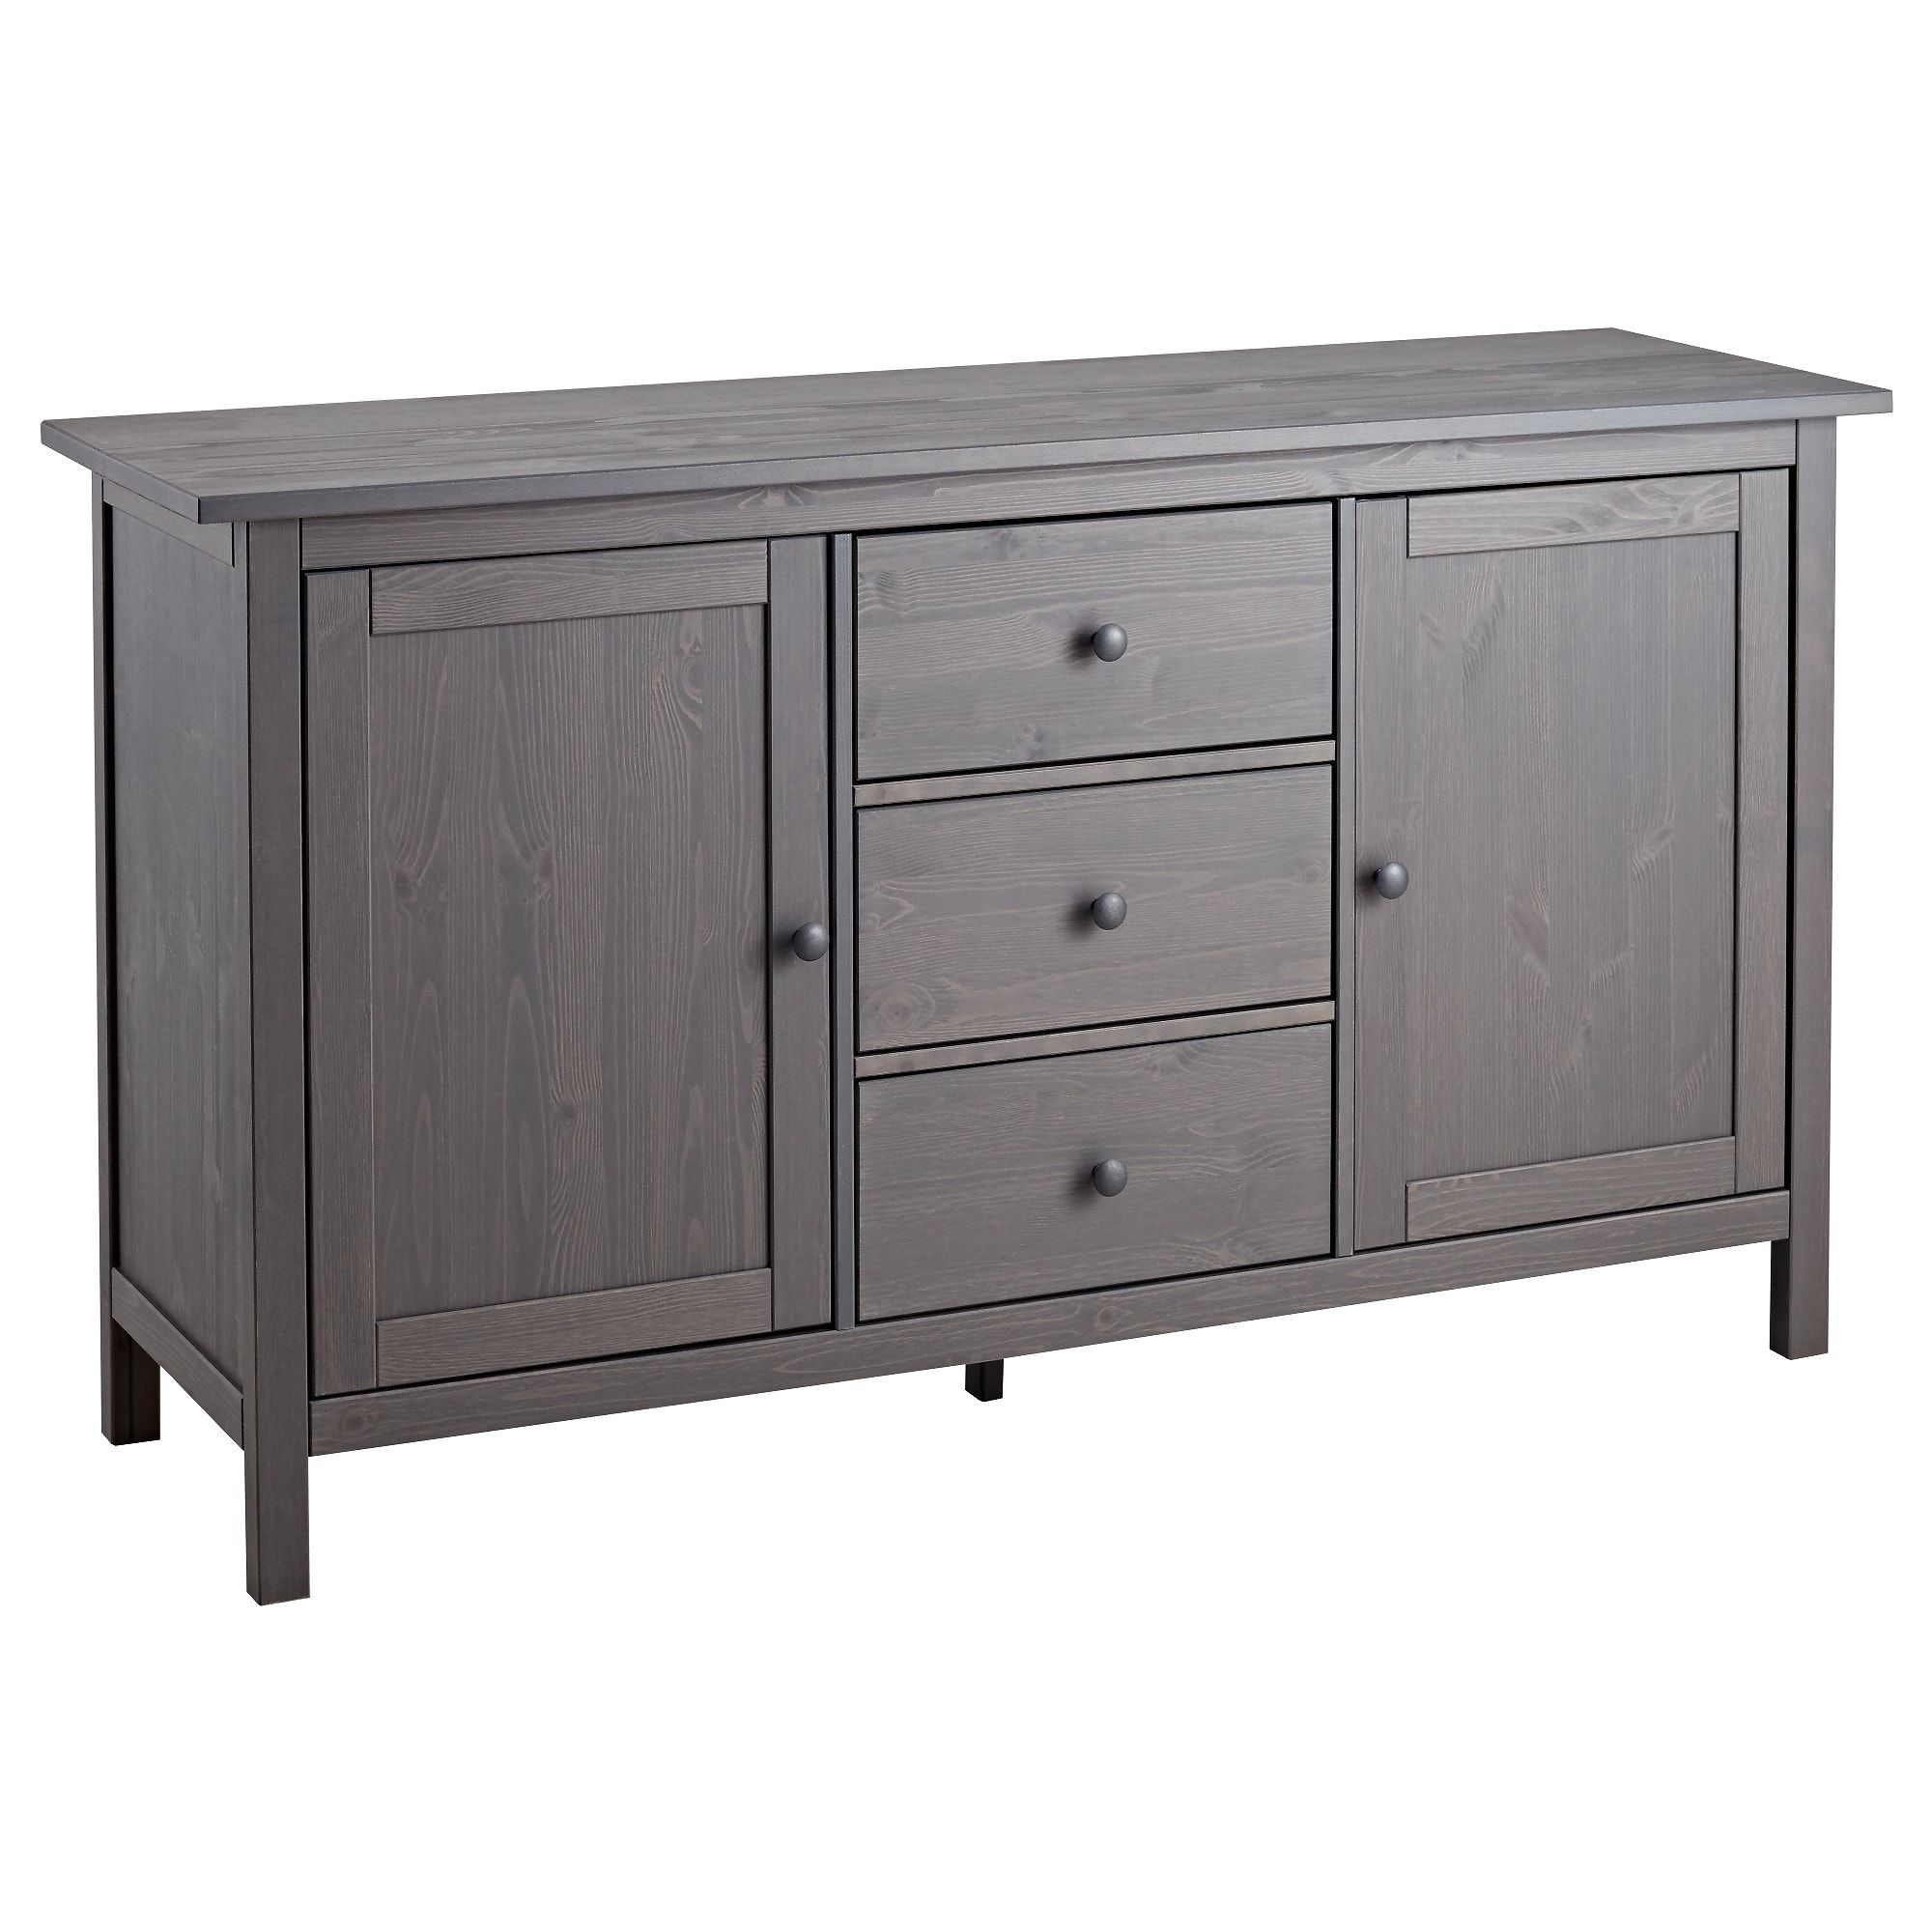 Natural South Pine Sideboards For Fashionable Hemnes Sideboard – Light Brown – Ikea (View 4 of 20)